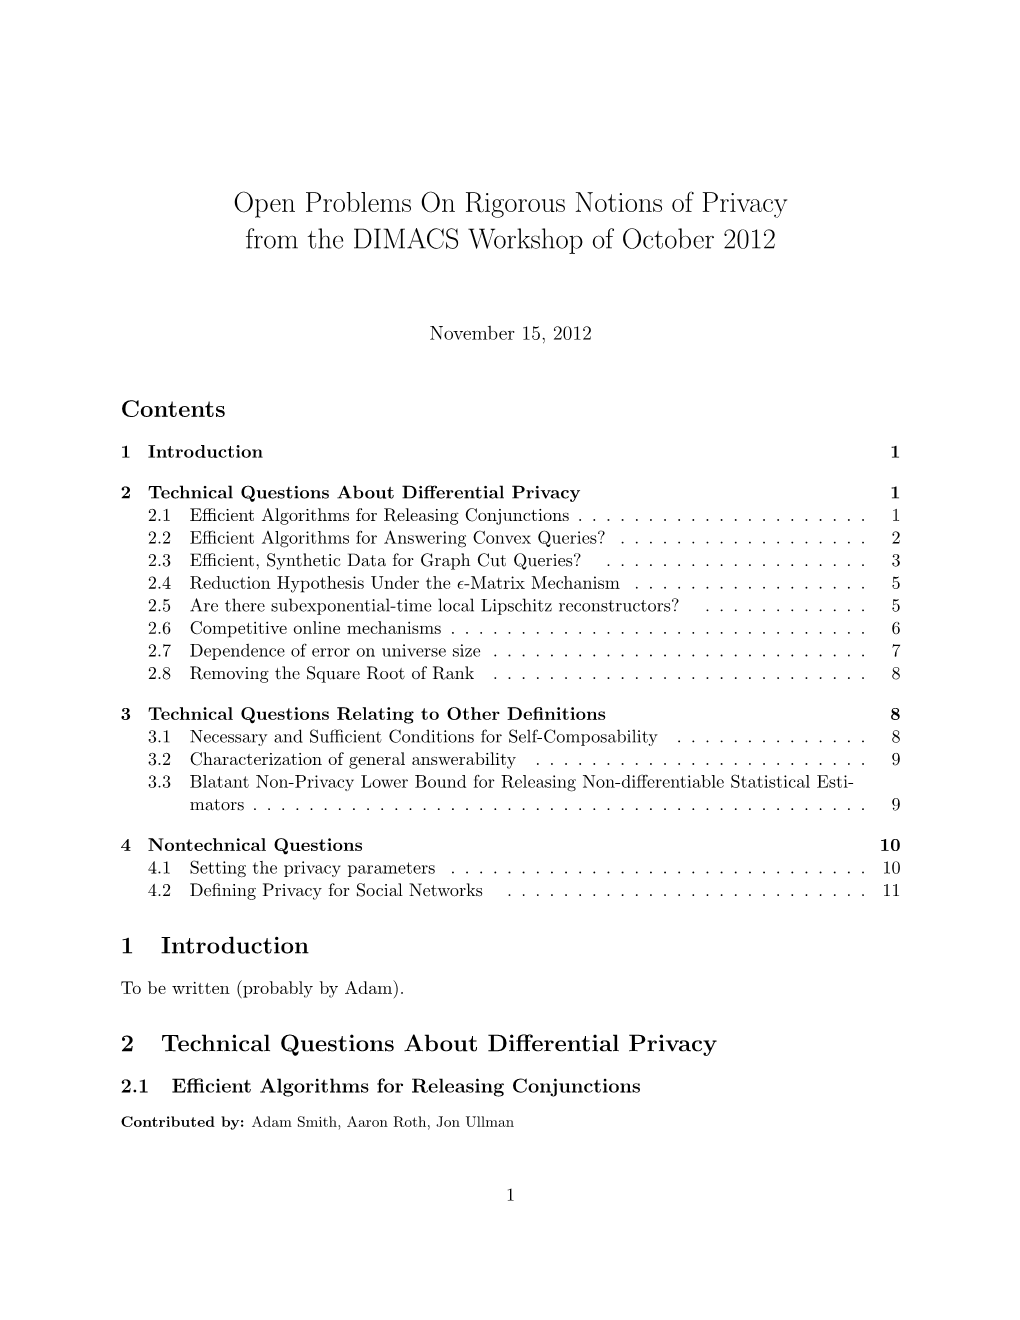 Open Problems on Rigorous Notions of Privacy from the DIMACS Workshop of October 2012